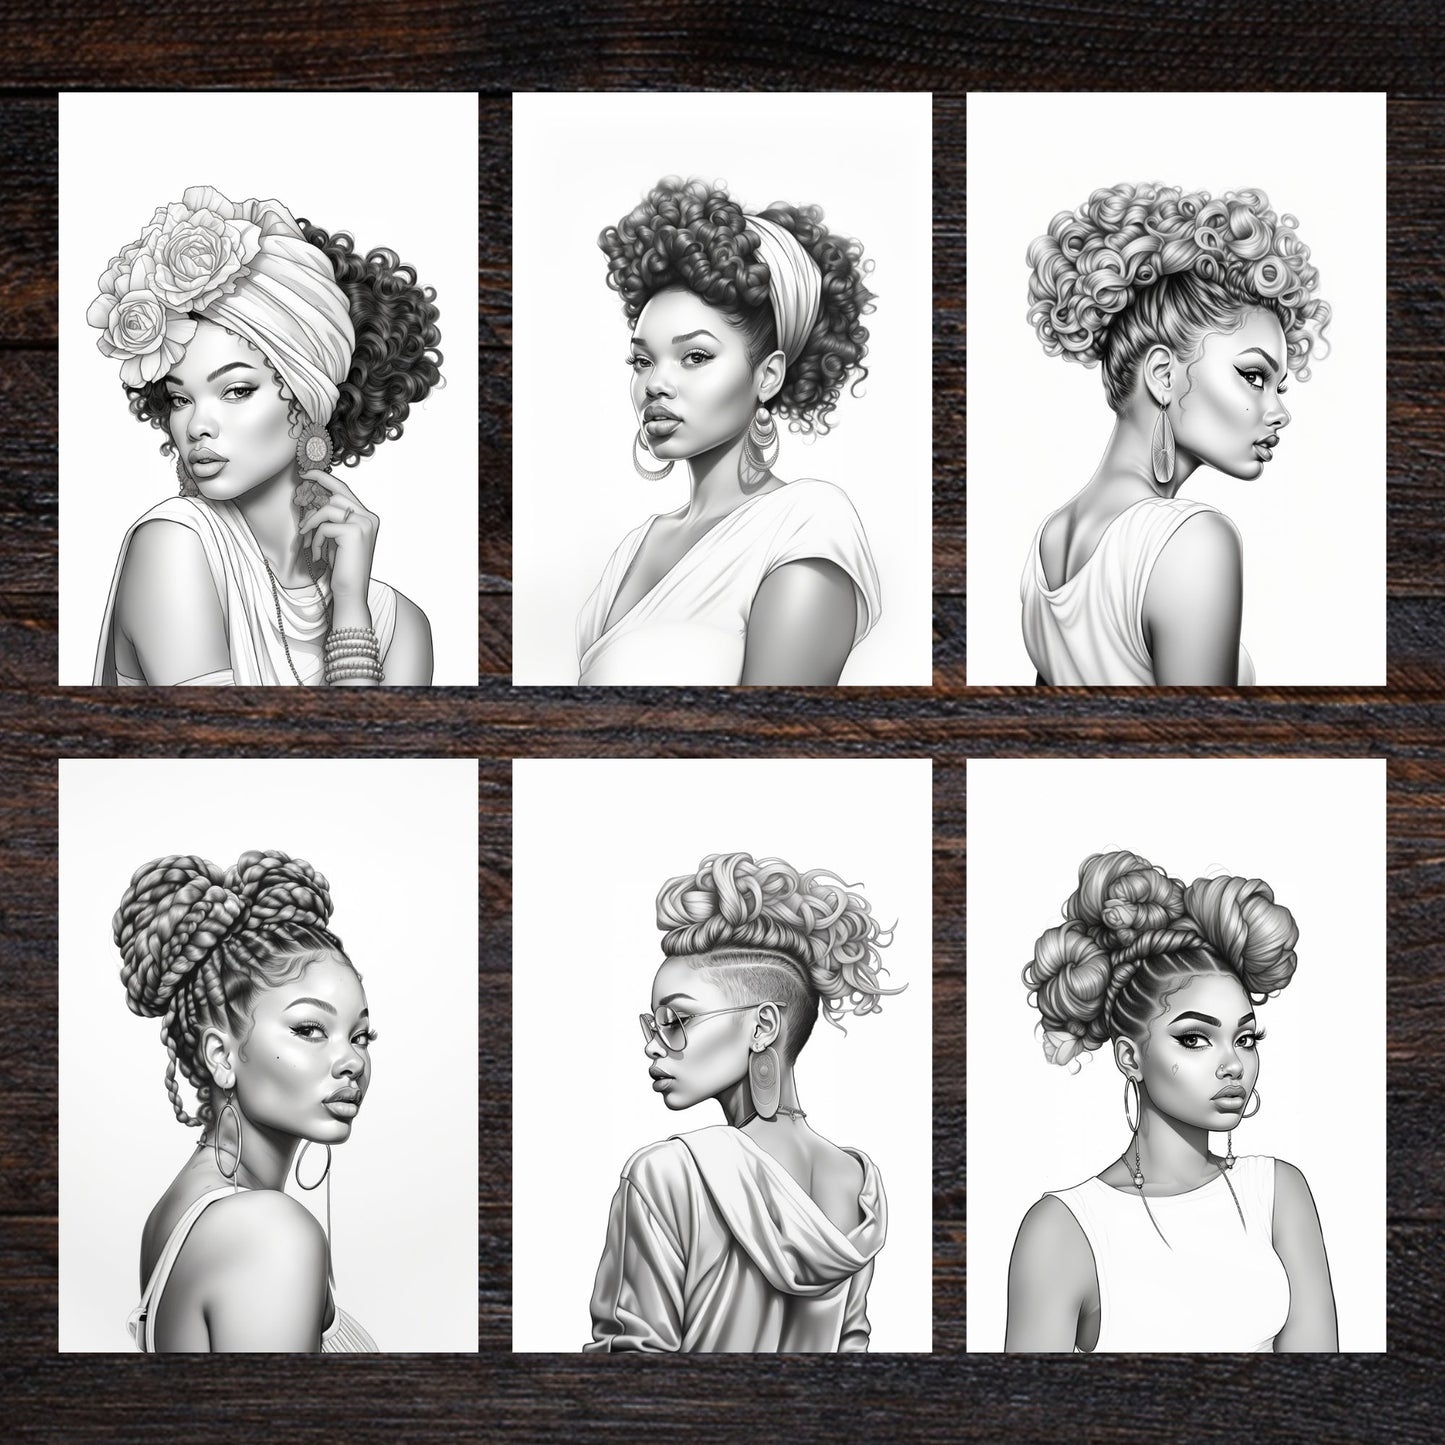 Beautiful Afrocentric Grayscale High Fashion Coloring Sheet Pages for Adults - Hairstyle, Makeup - Procreate Digital Download Printable PDF